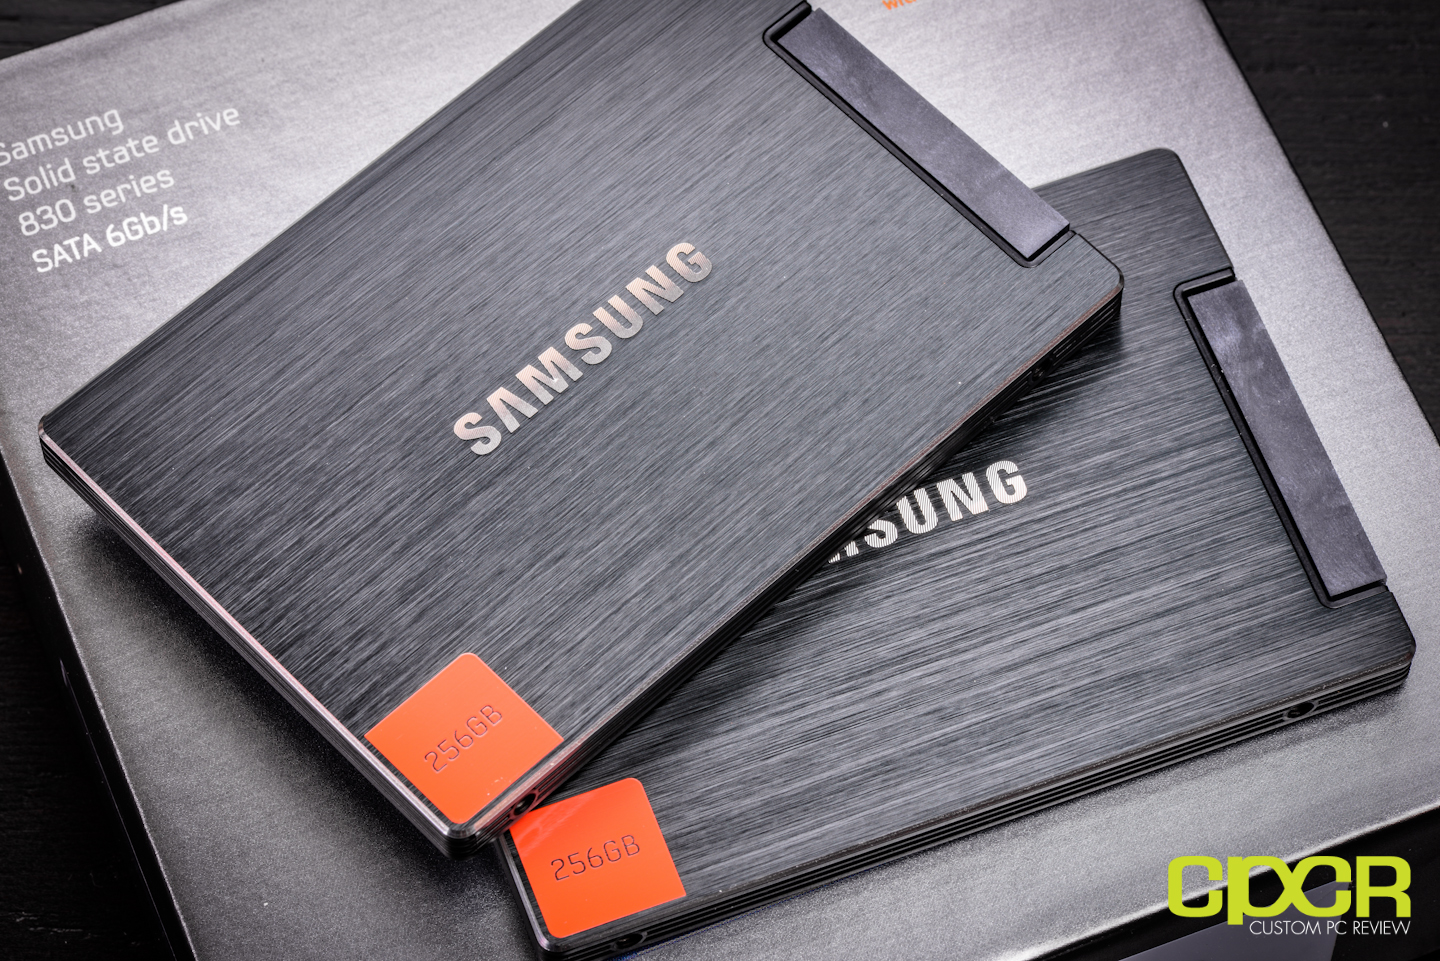 Samsung 830 Revisited: 256GB SSD Review